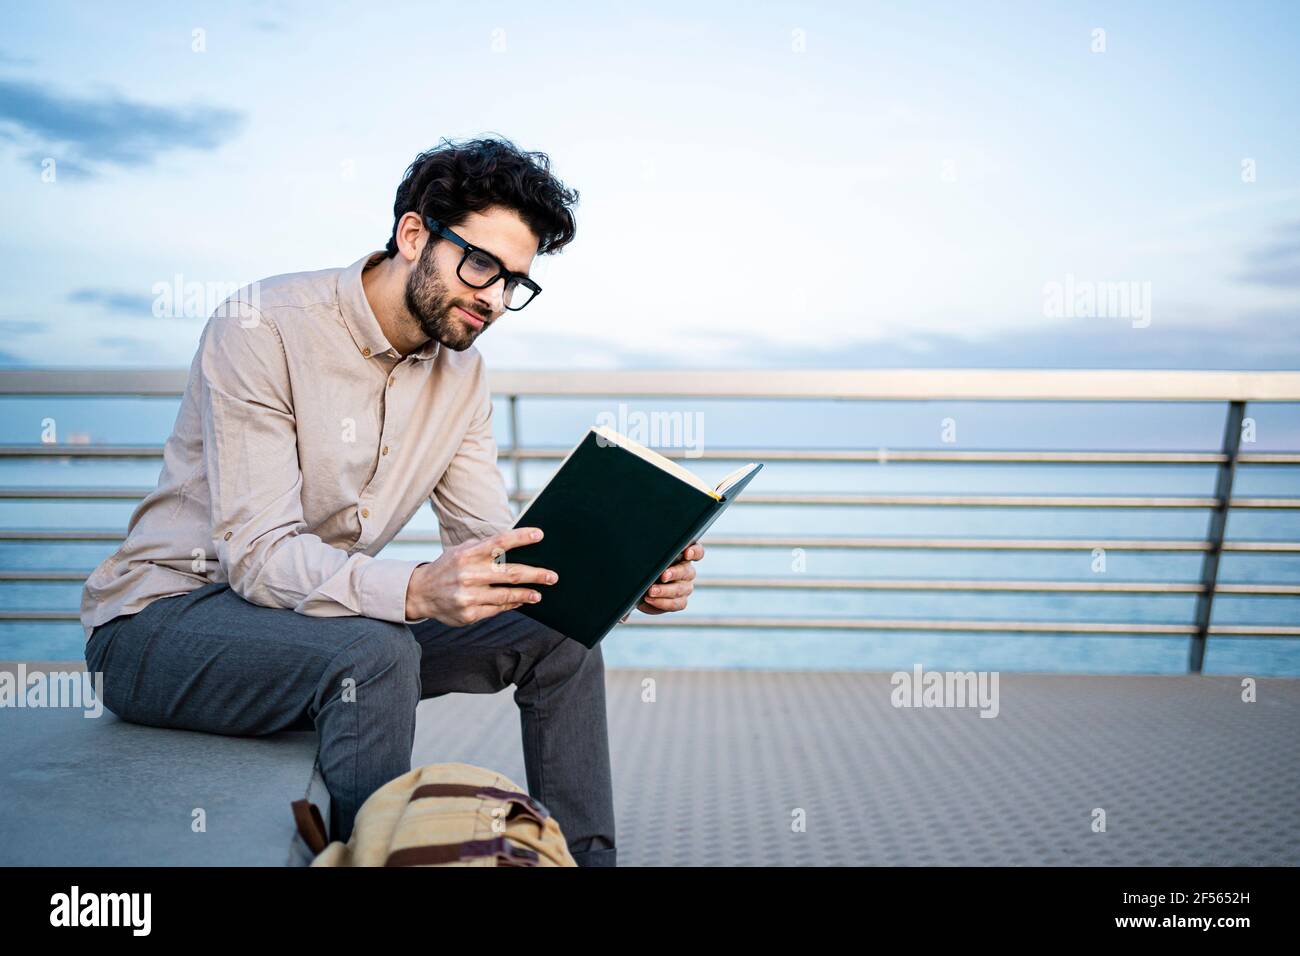 Smiling businessman reading diary while sitting on bench in front of blue sky Stock Photo